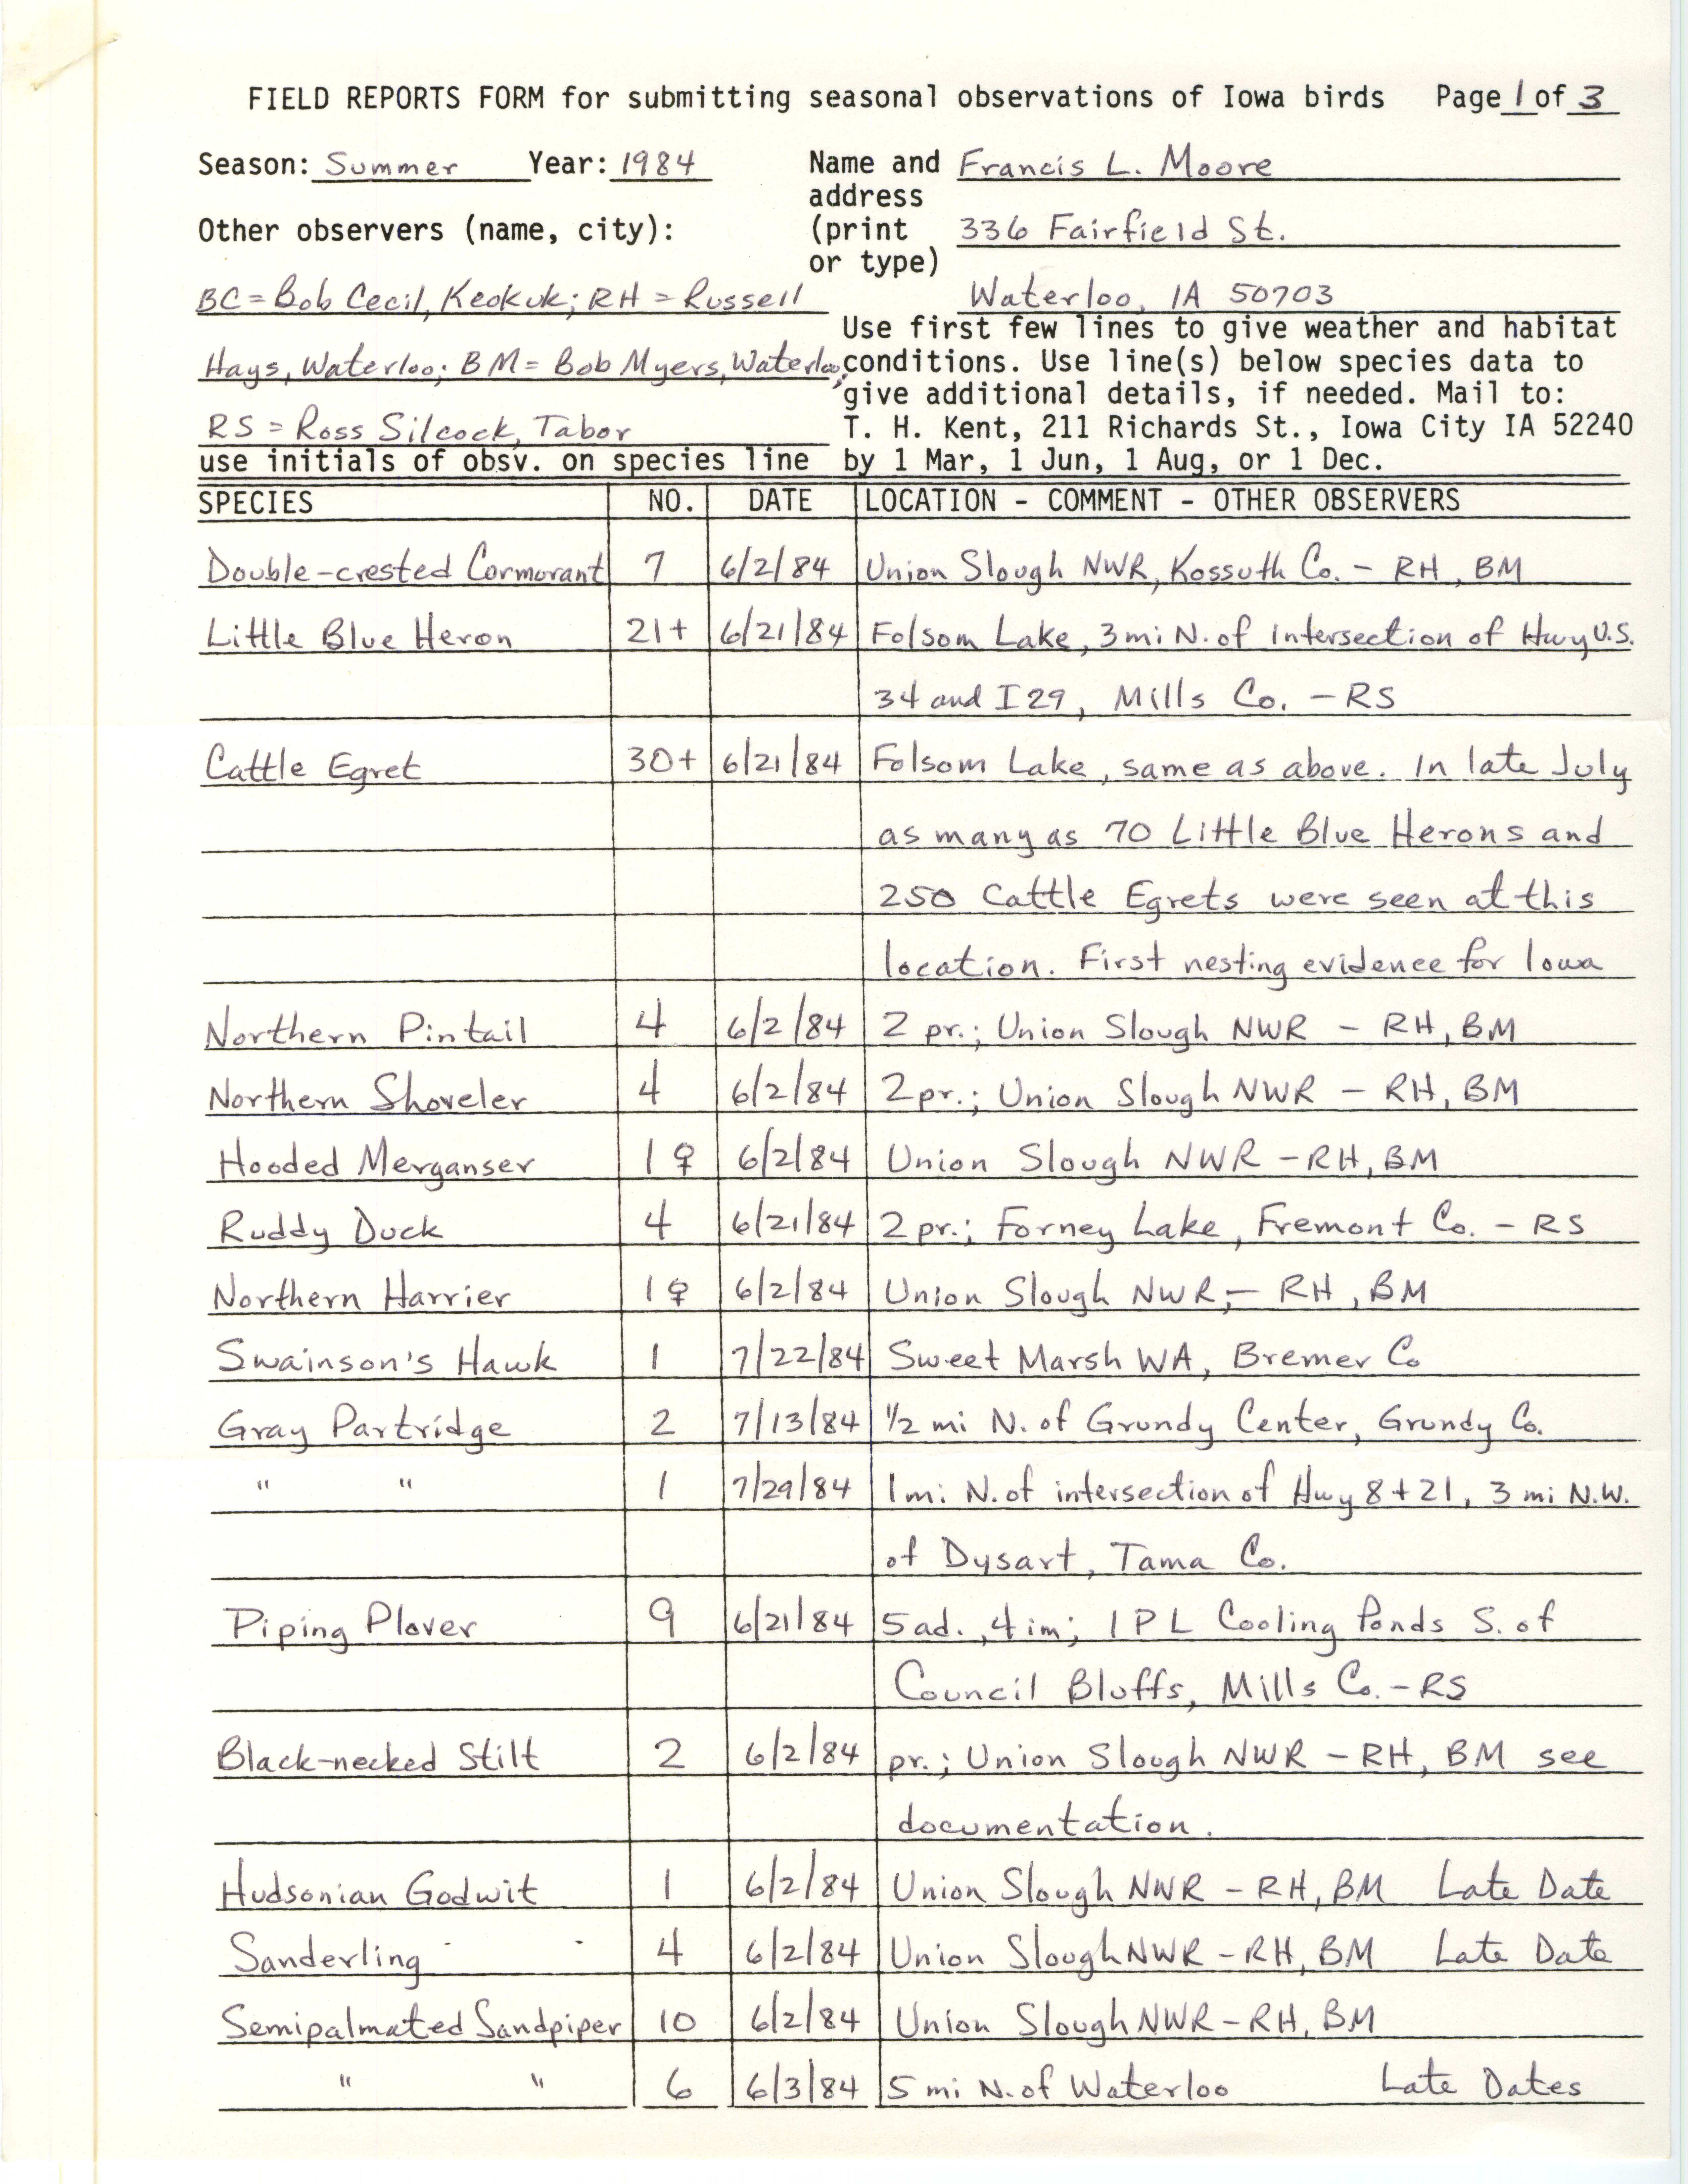 Field notes contributed by Francis L. Moore, summer 1984